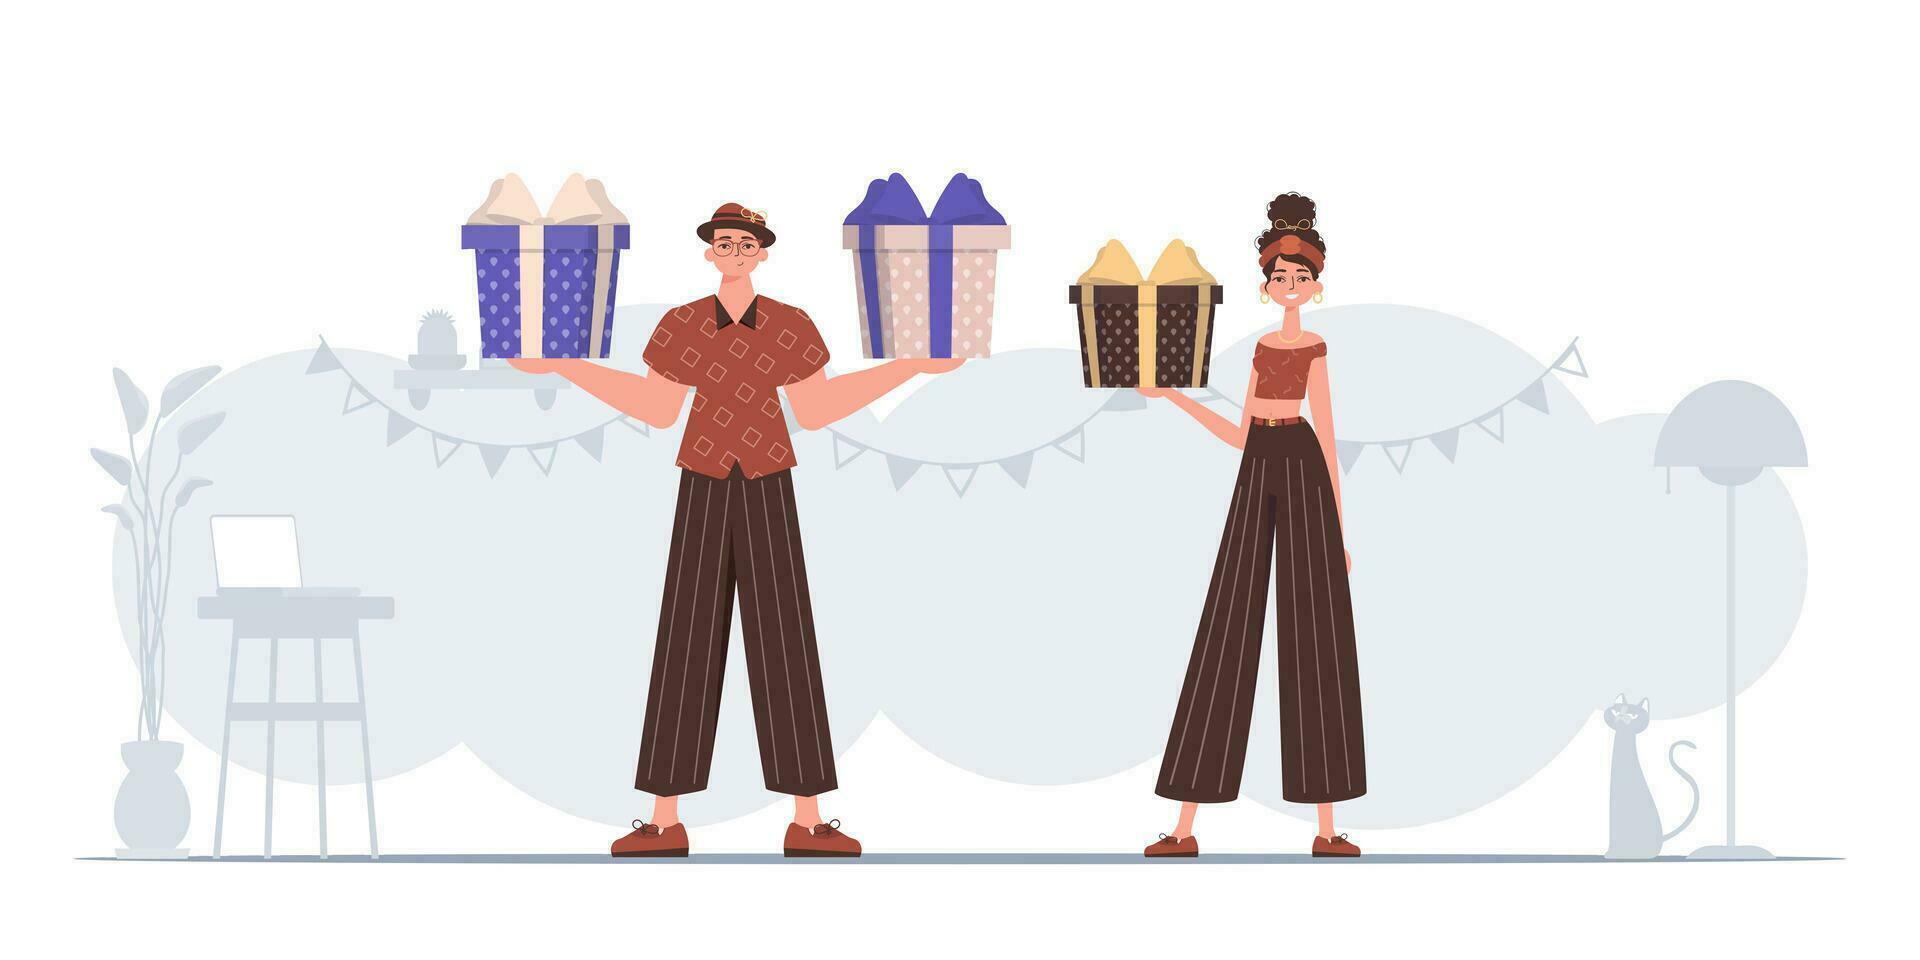 The guy and the girl are holding gifts. Christmas gift concept. vector